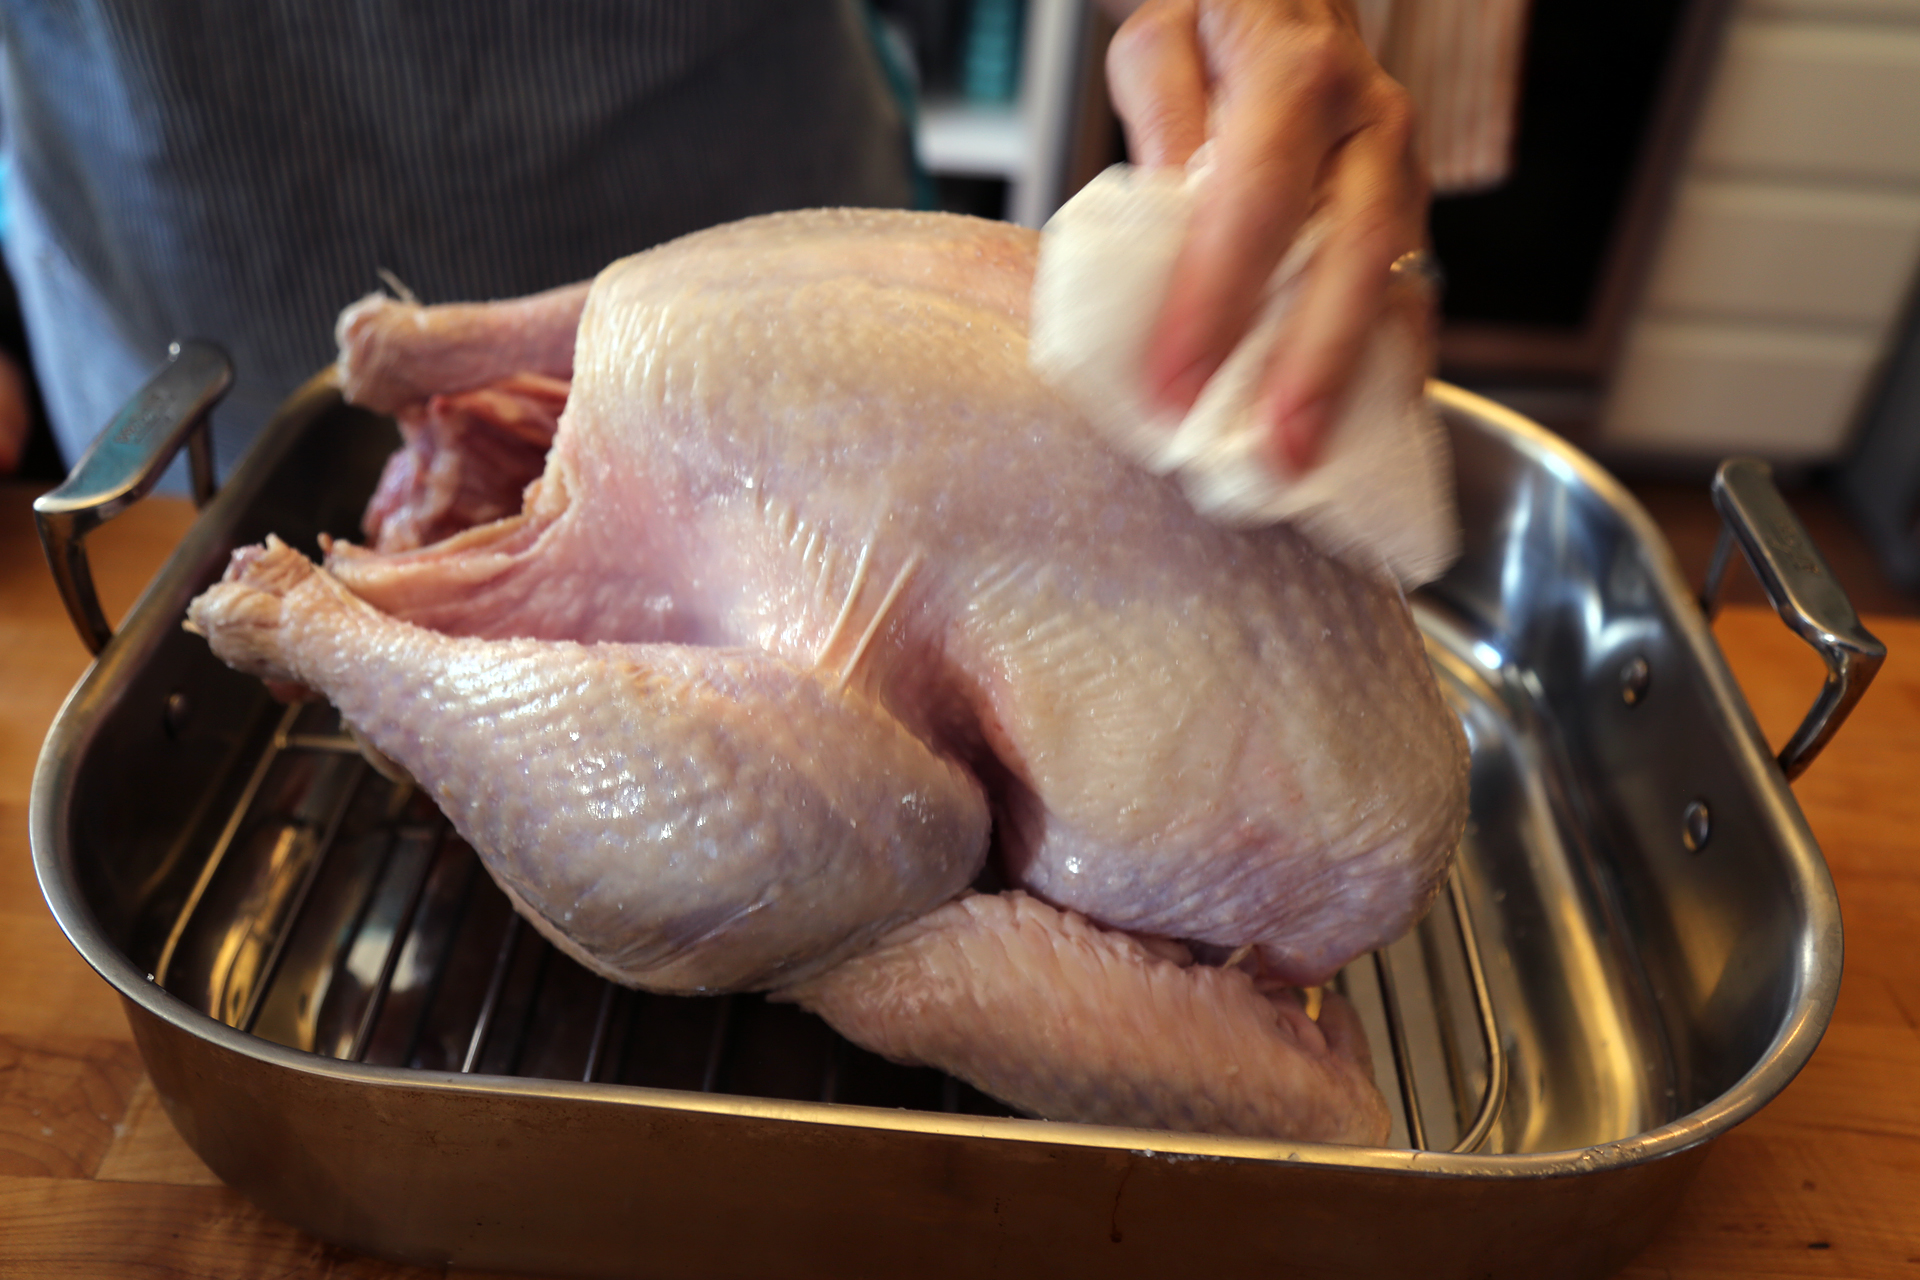 Take the chill off the turkey and dry it all over with paper towels.